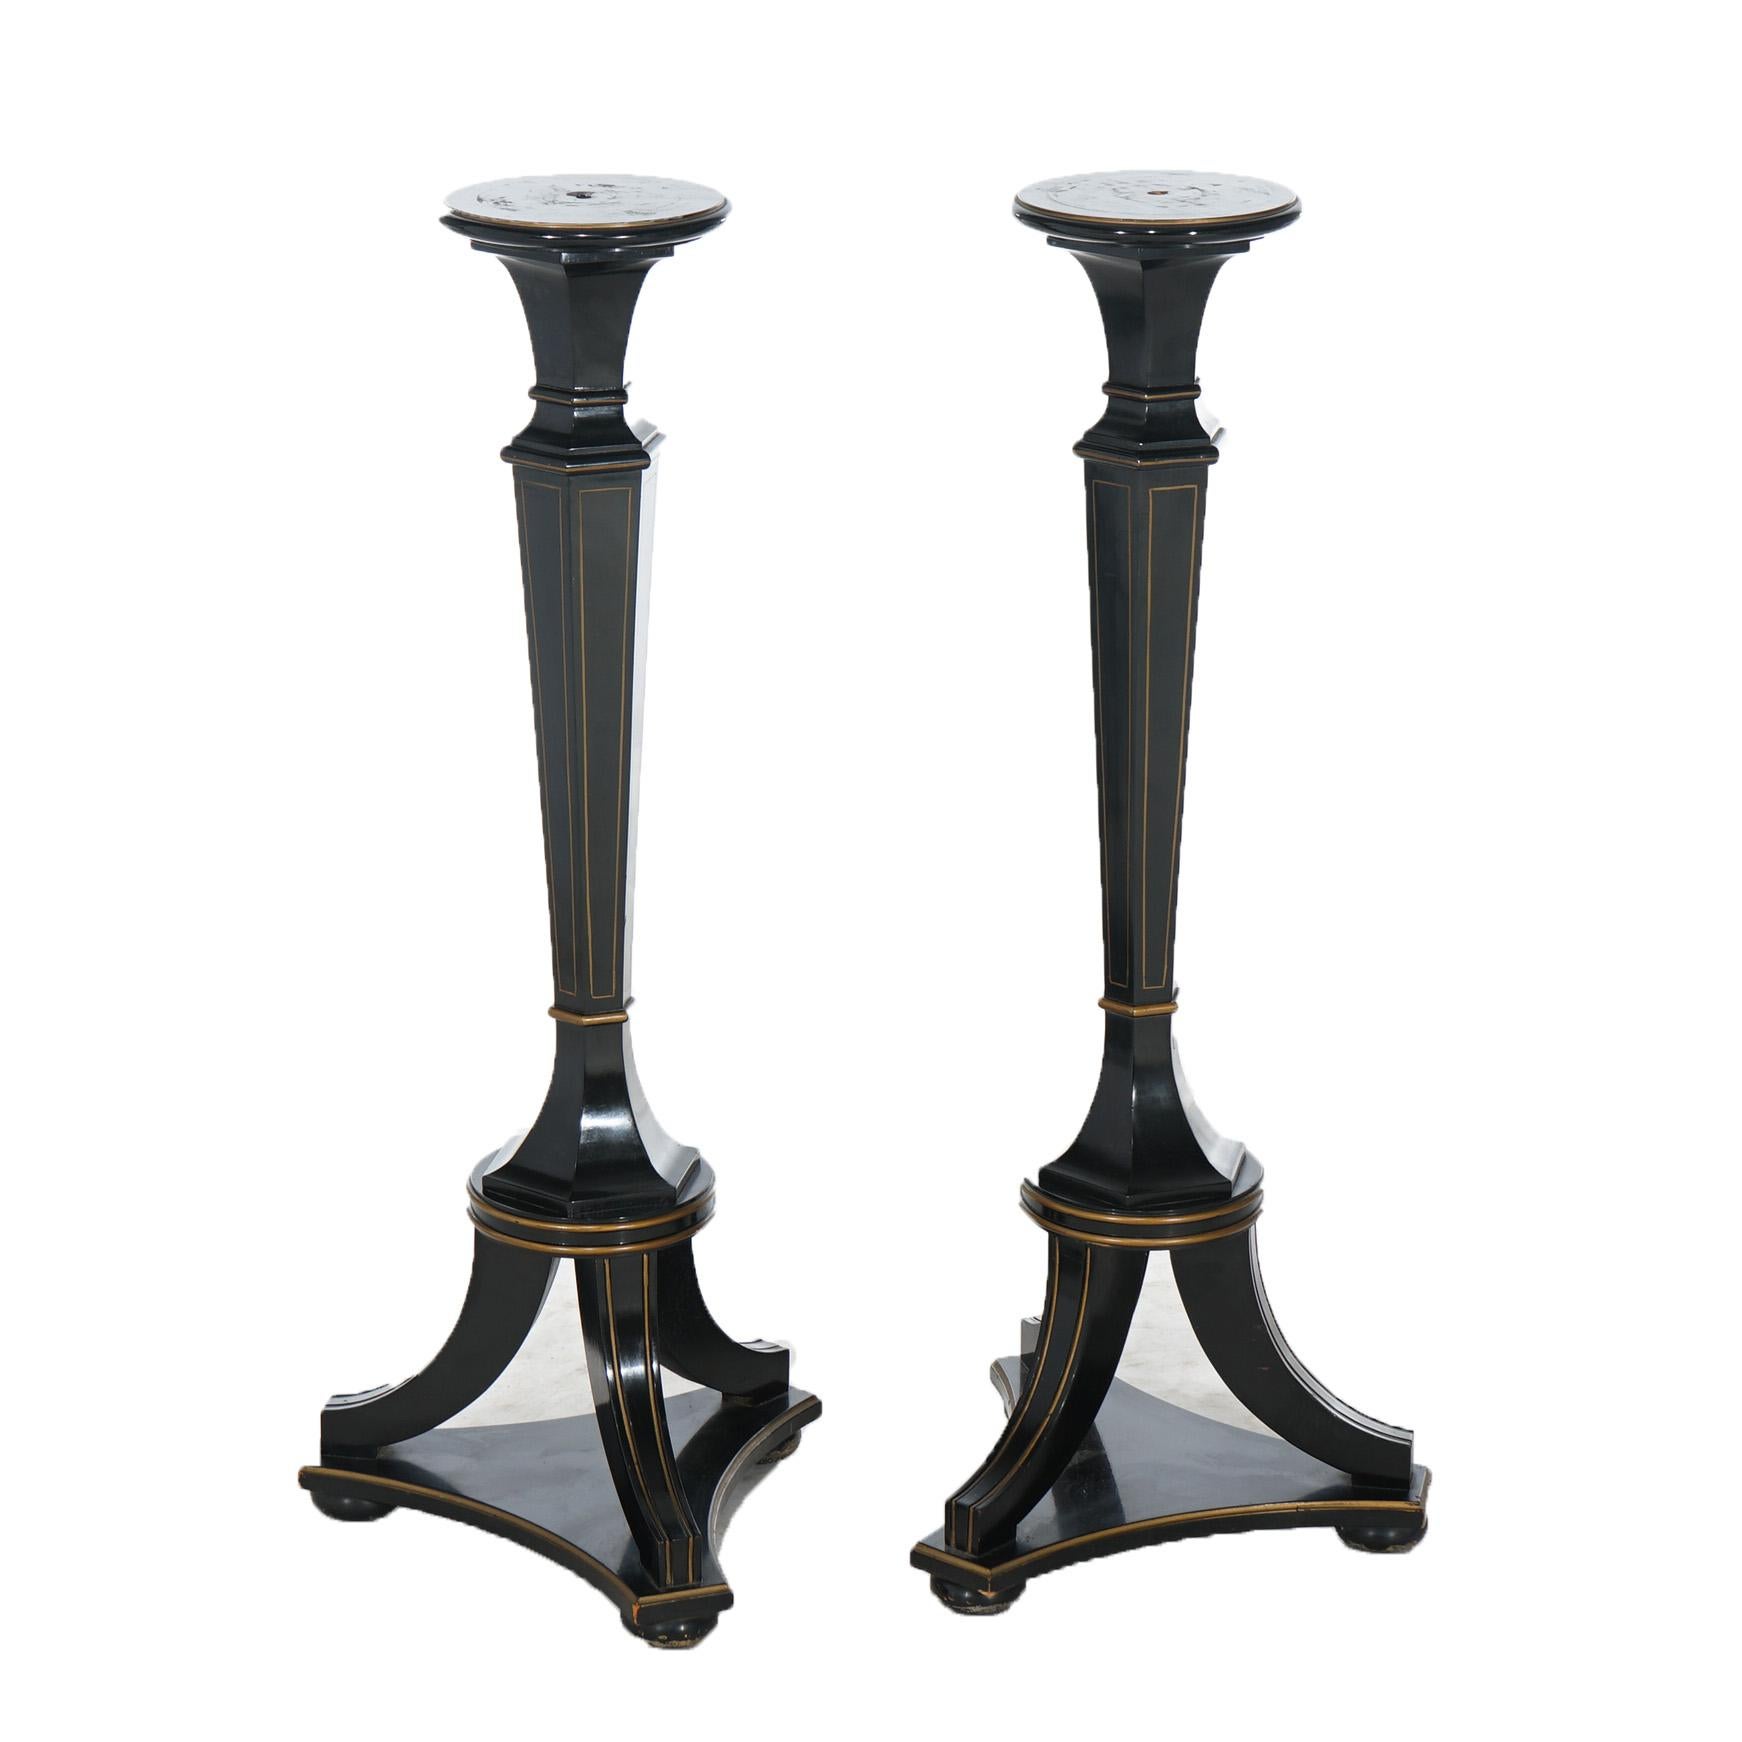 Pair of Antique Neoclassical Ebonized Wood Stands With Tapered Columns & Footed, C1900

Measures - 40.5